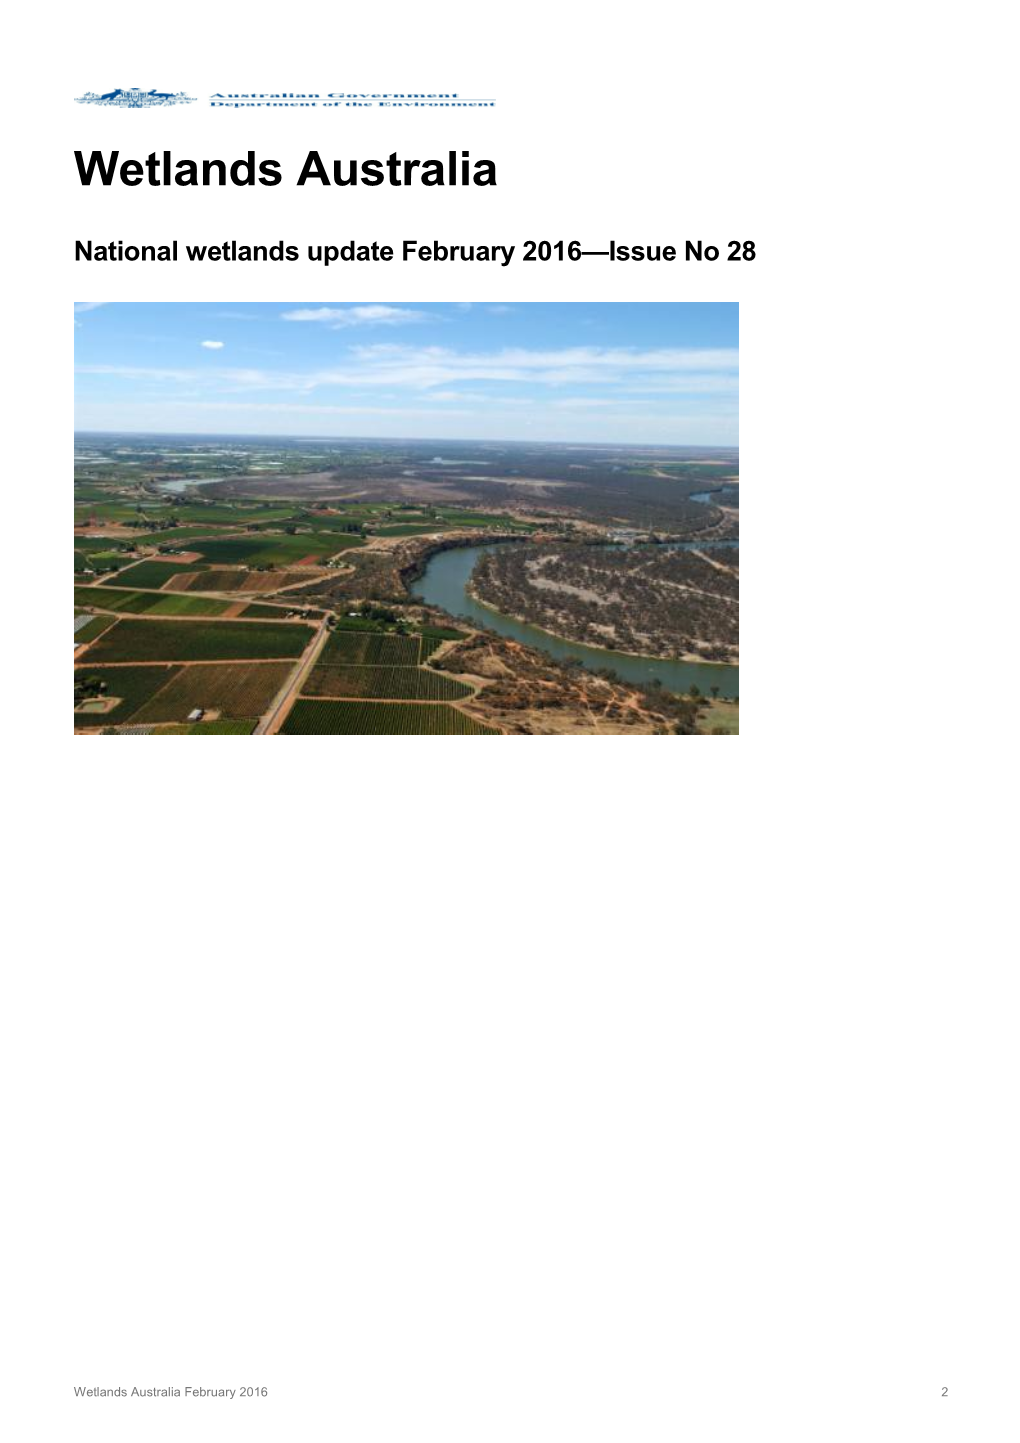 National Wetlands Update February 2016 Issue No 28